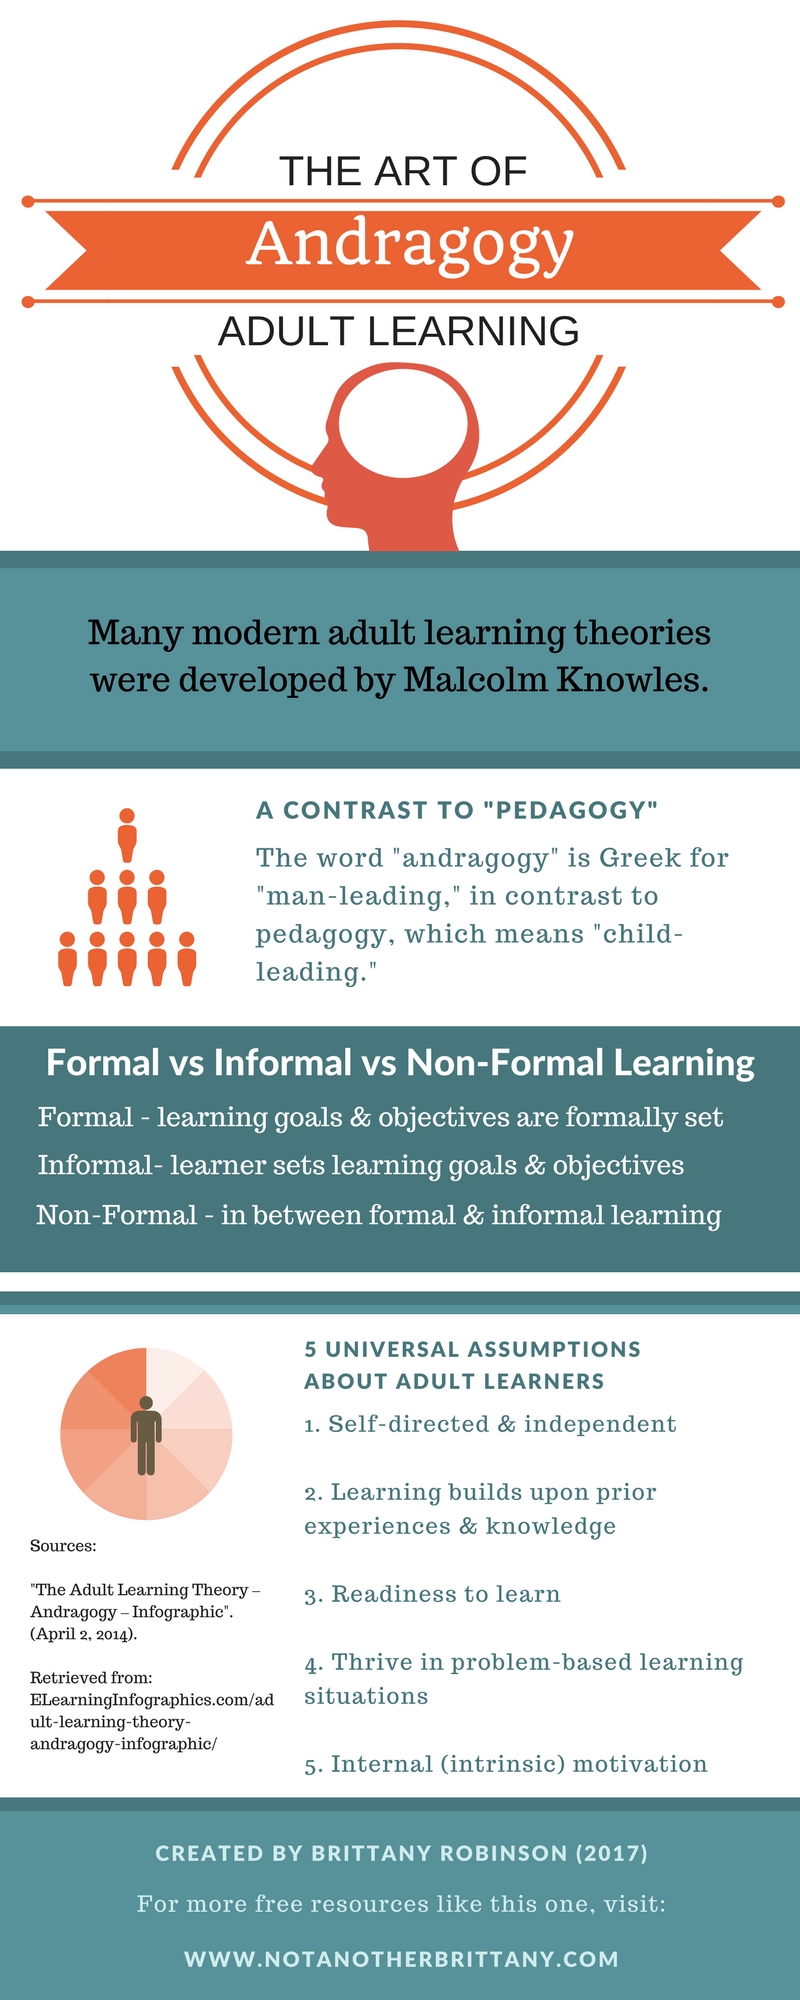 Andragogy: Adult Learning Theory